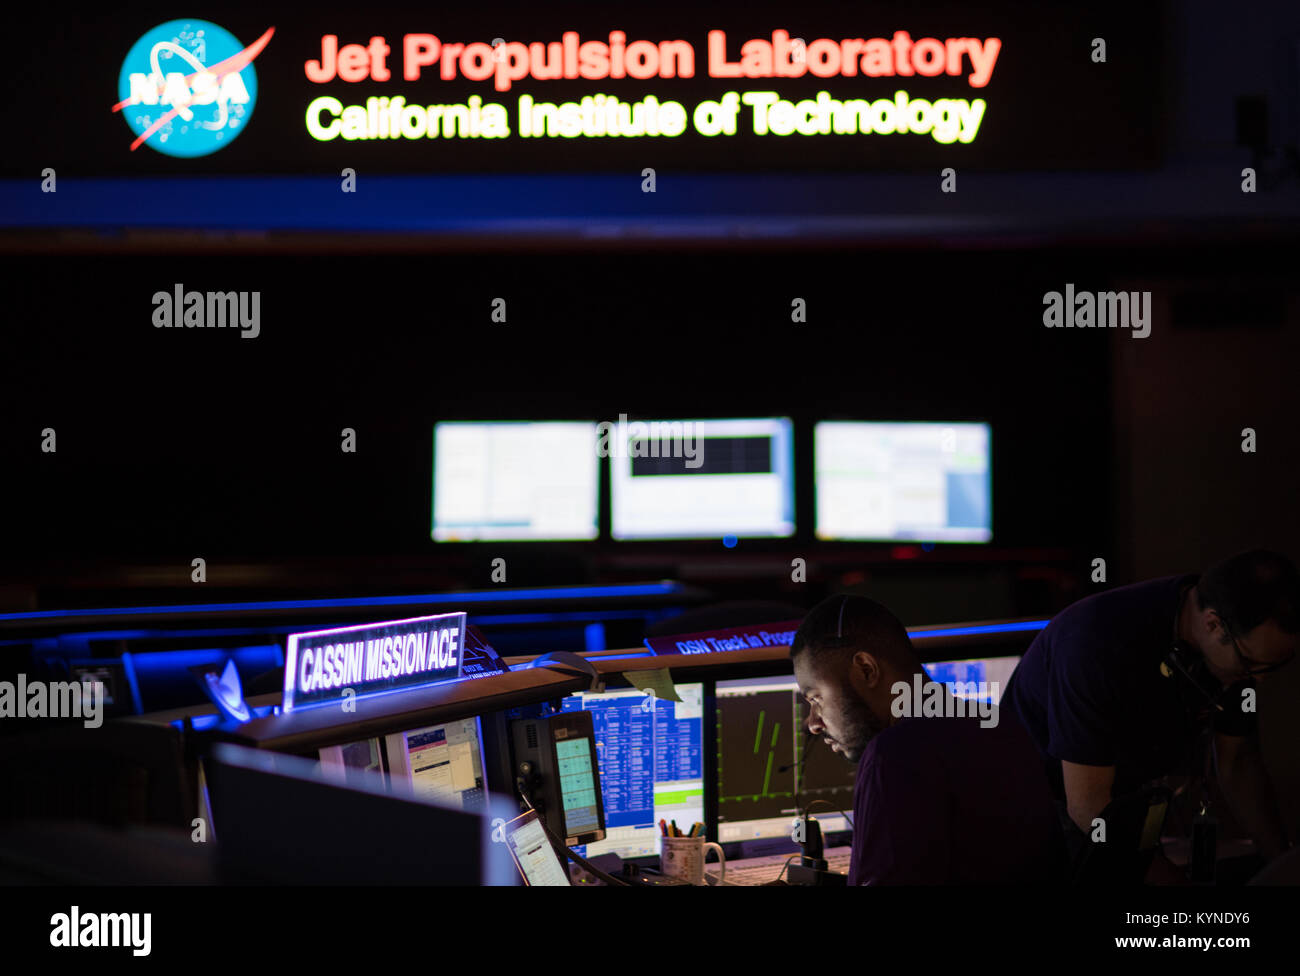 The Cassini Mission Ace console is seen inside the Space Flight Operations Center at NASA's Jet Propulsion Laboratory, Thursday, Sept. 14, 2017 in Pasadena, California. Since its arrival in 2004, the Cassini-Huygens mission has been a discovery machine, revolutionizing our knowledge of the Saturn system and captivating us with data and images never before obtained with such detail and clarity. On Sept. 15, 2017, operators will deliberately plunge the spacecraft into Saturn, as Cassini gathered science until the end. The “plunge” ensures Saturn’s moons will remain pristine for future exploratio Stock Photo